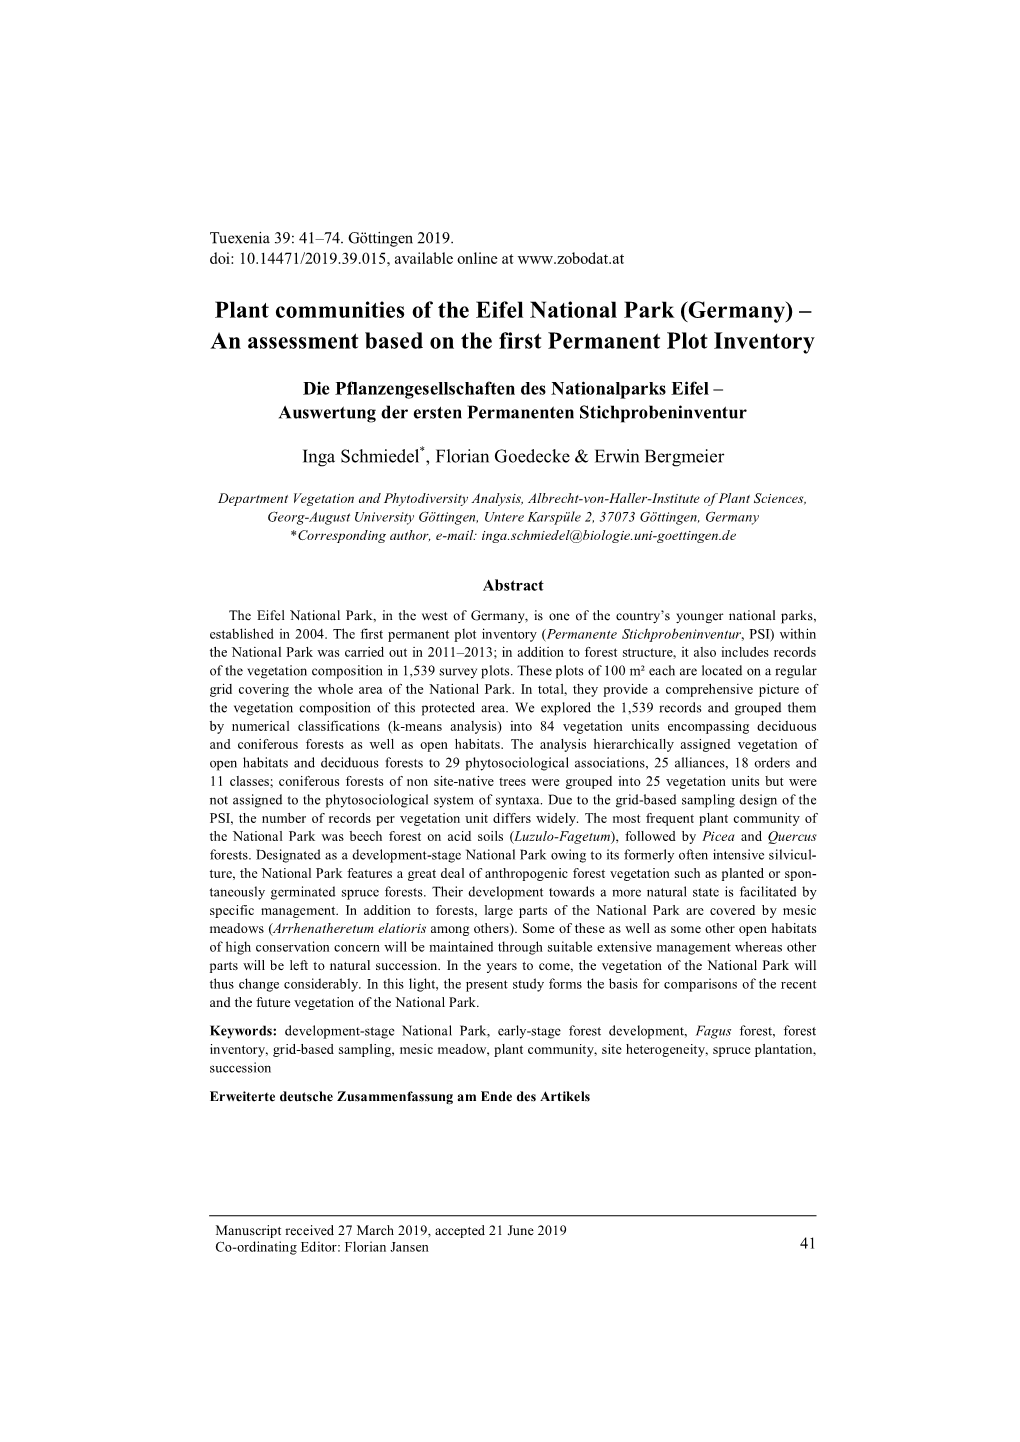 Plant Communities of the Eifel National Park (Germany) – an Assessment Based on the First Permanent Plot Inventory